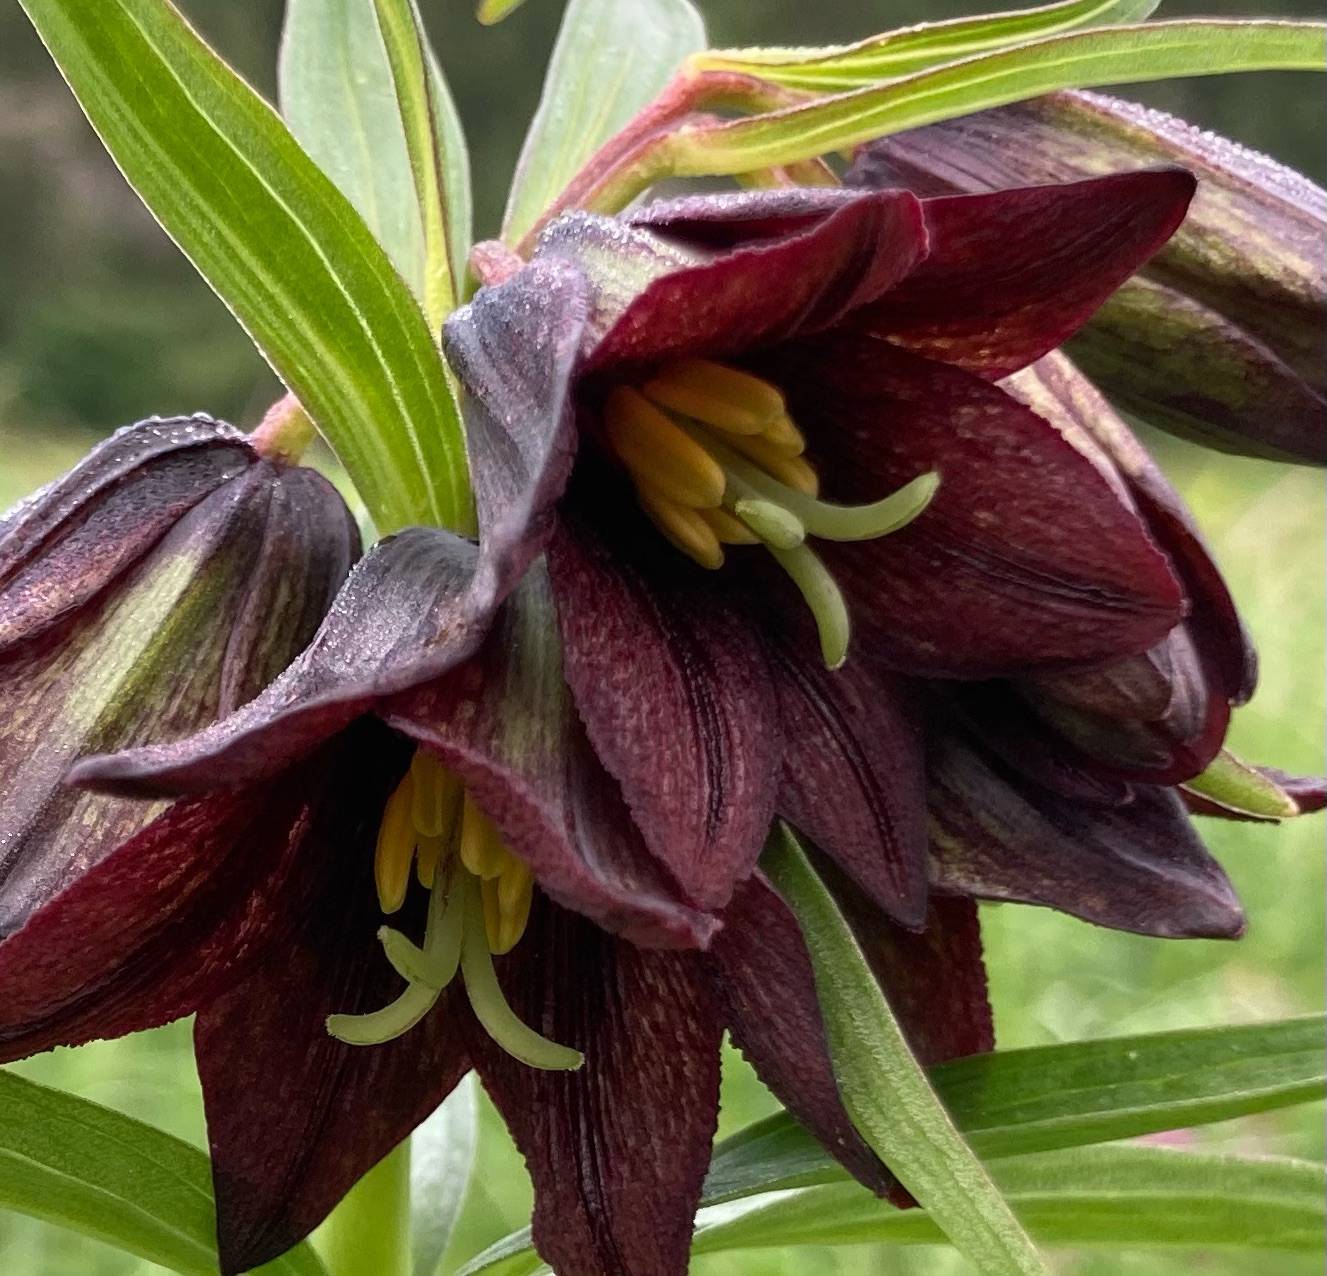 This photo shared on June 19 shows a chocolate lily. (Courtesy Photo / Deborah Rudis)